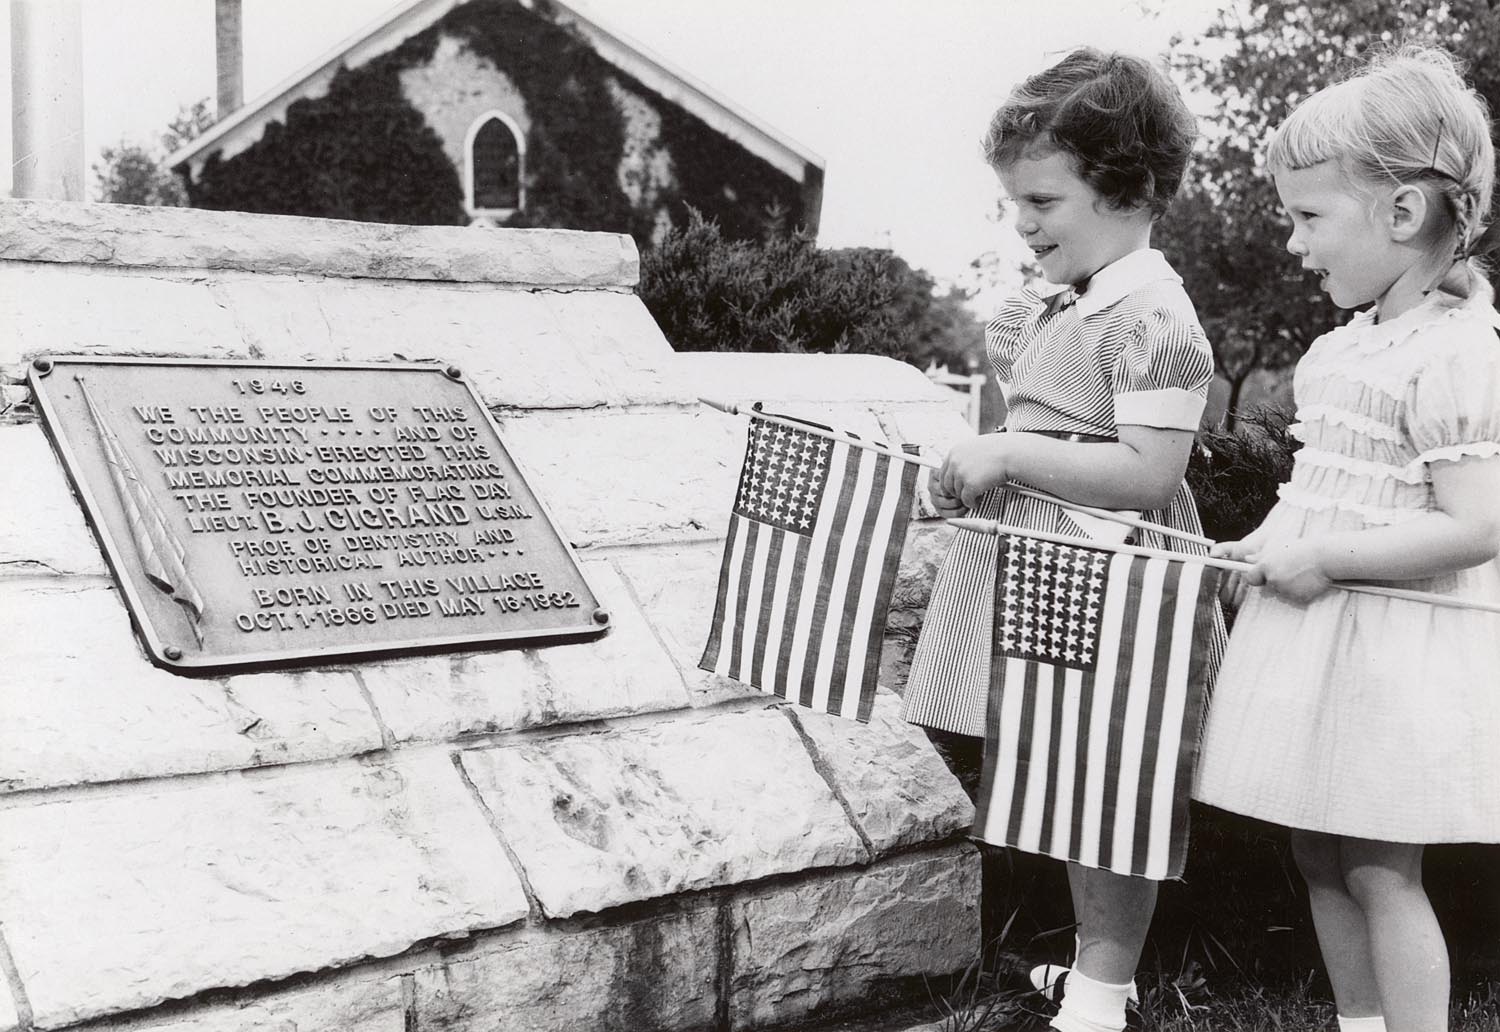 Two young girls hold American flags next to a plaque honoring Bernard J. Cigrand in Waubeka